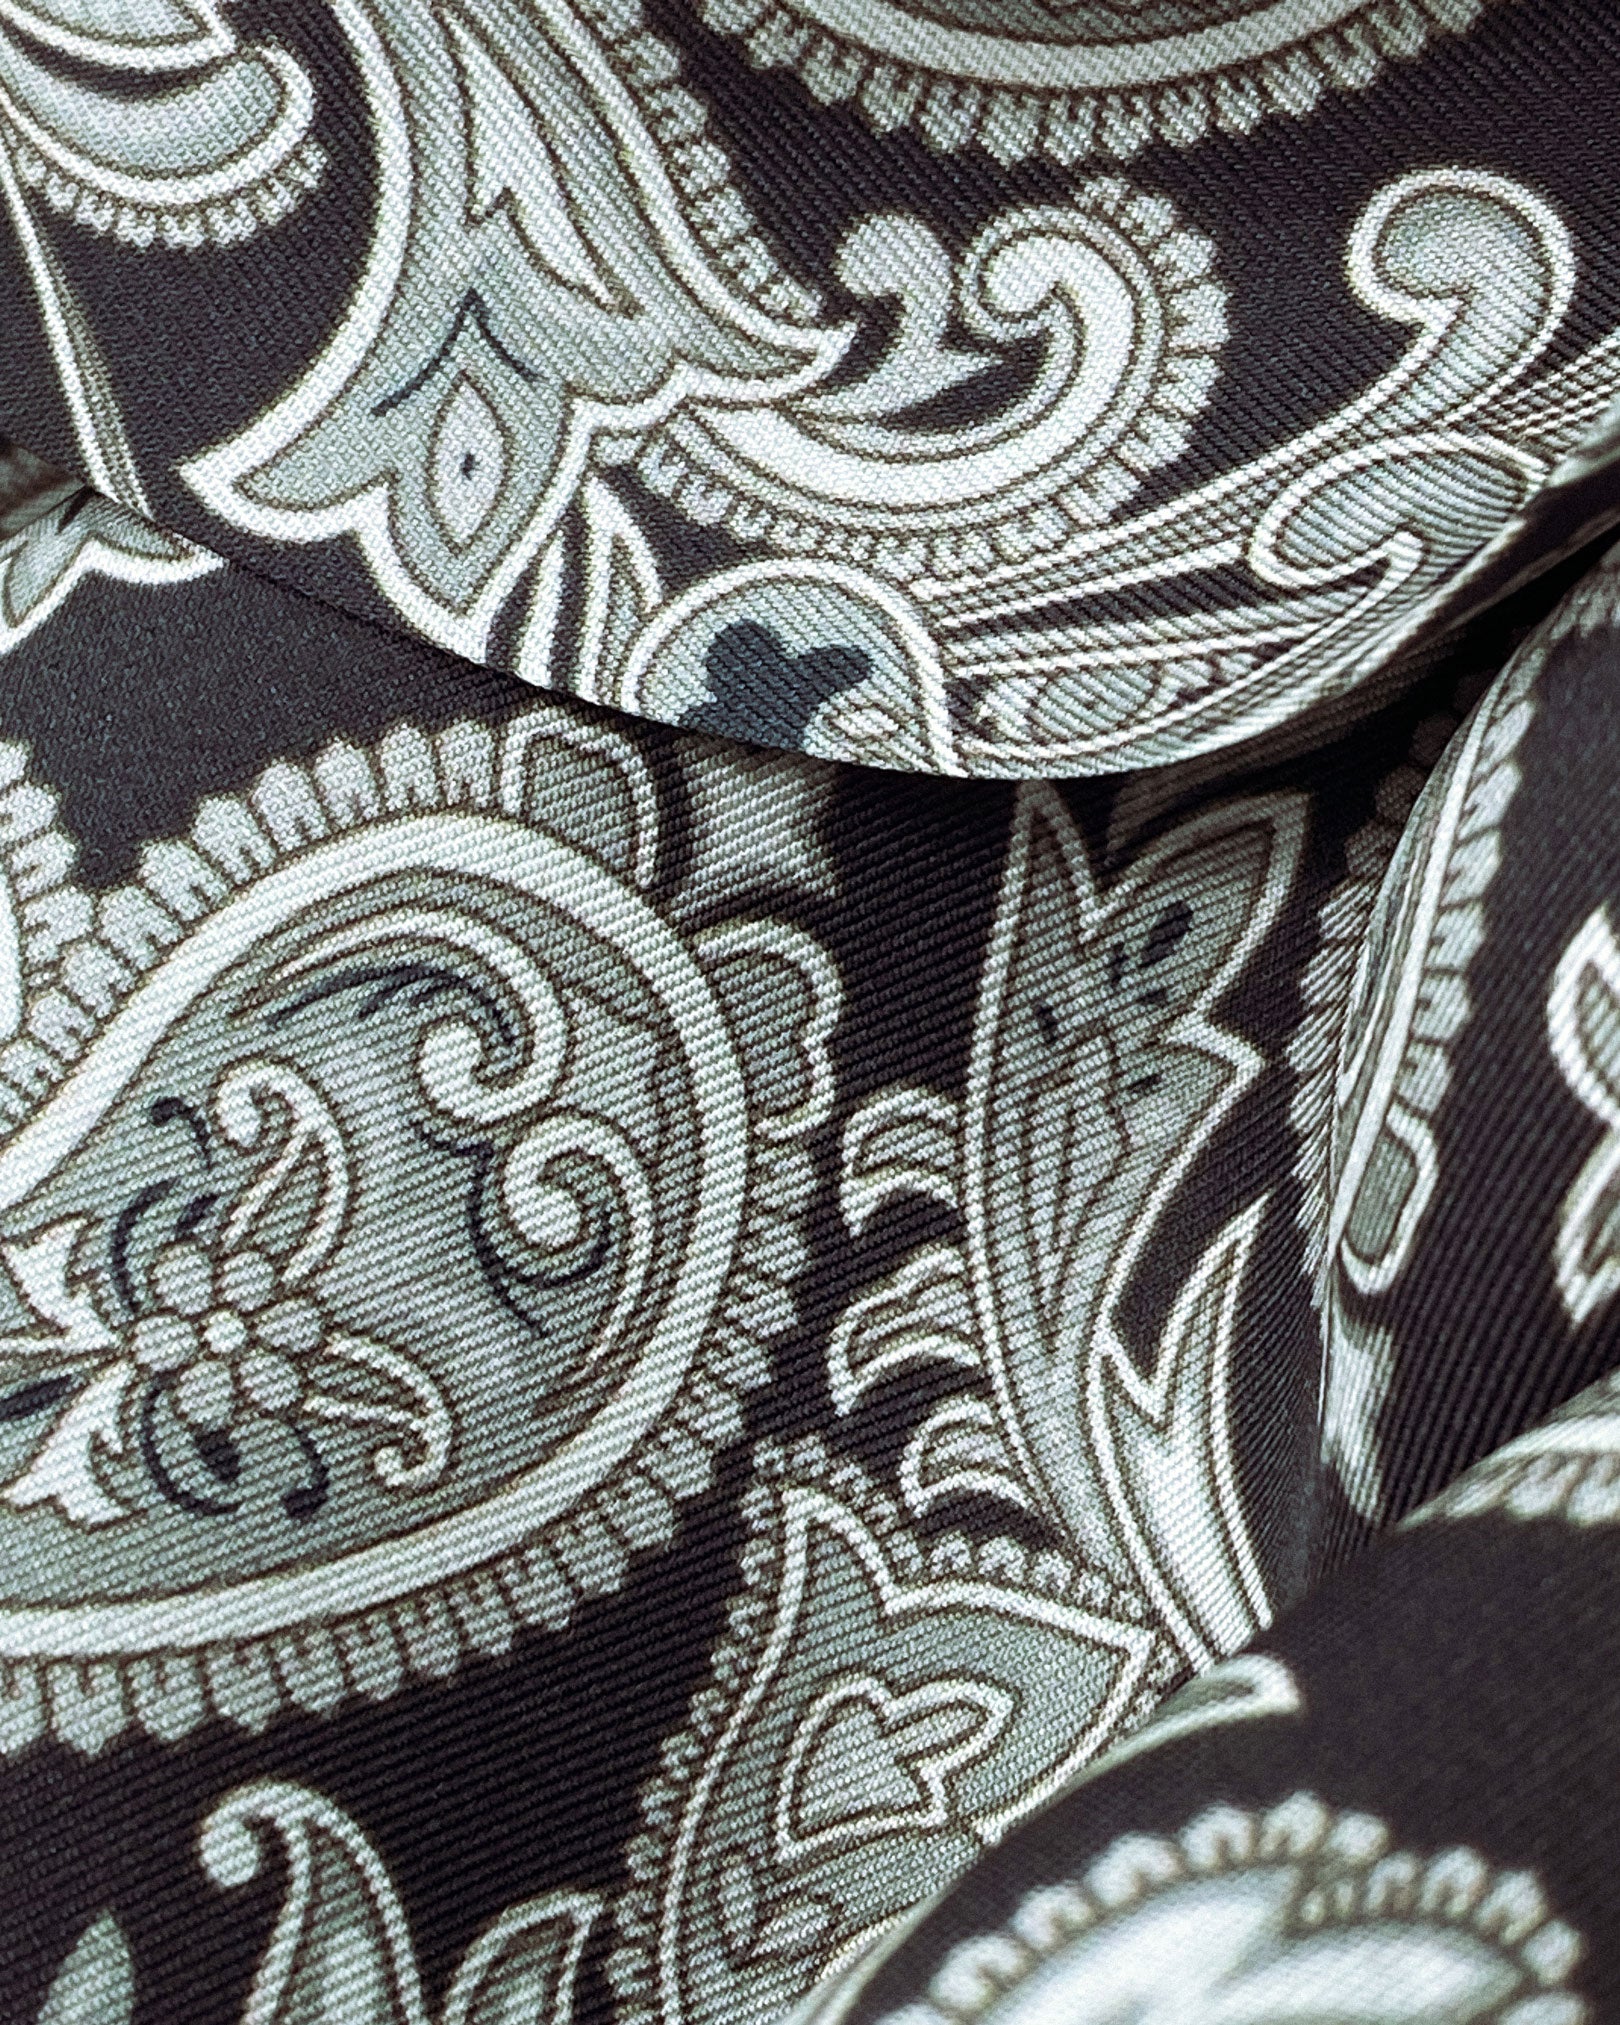 Ruffled close-up view of the Jaspar silk scarf, presenting a closer view of the monochrome paisley patterns.